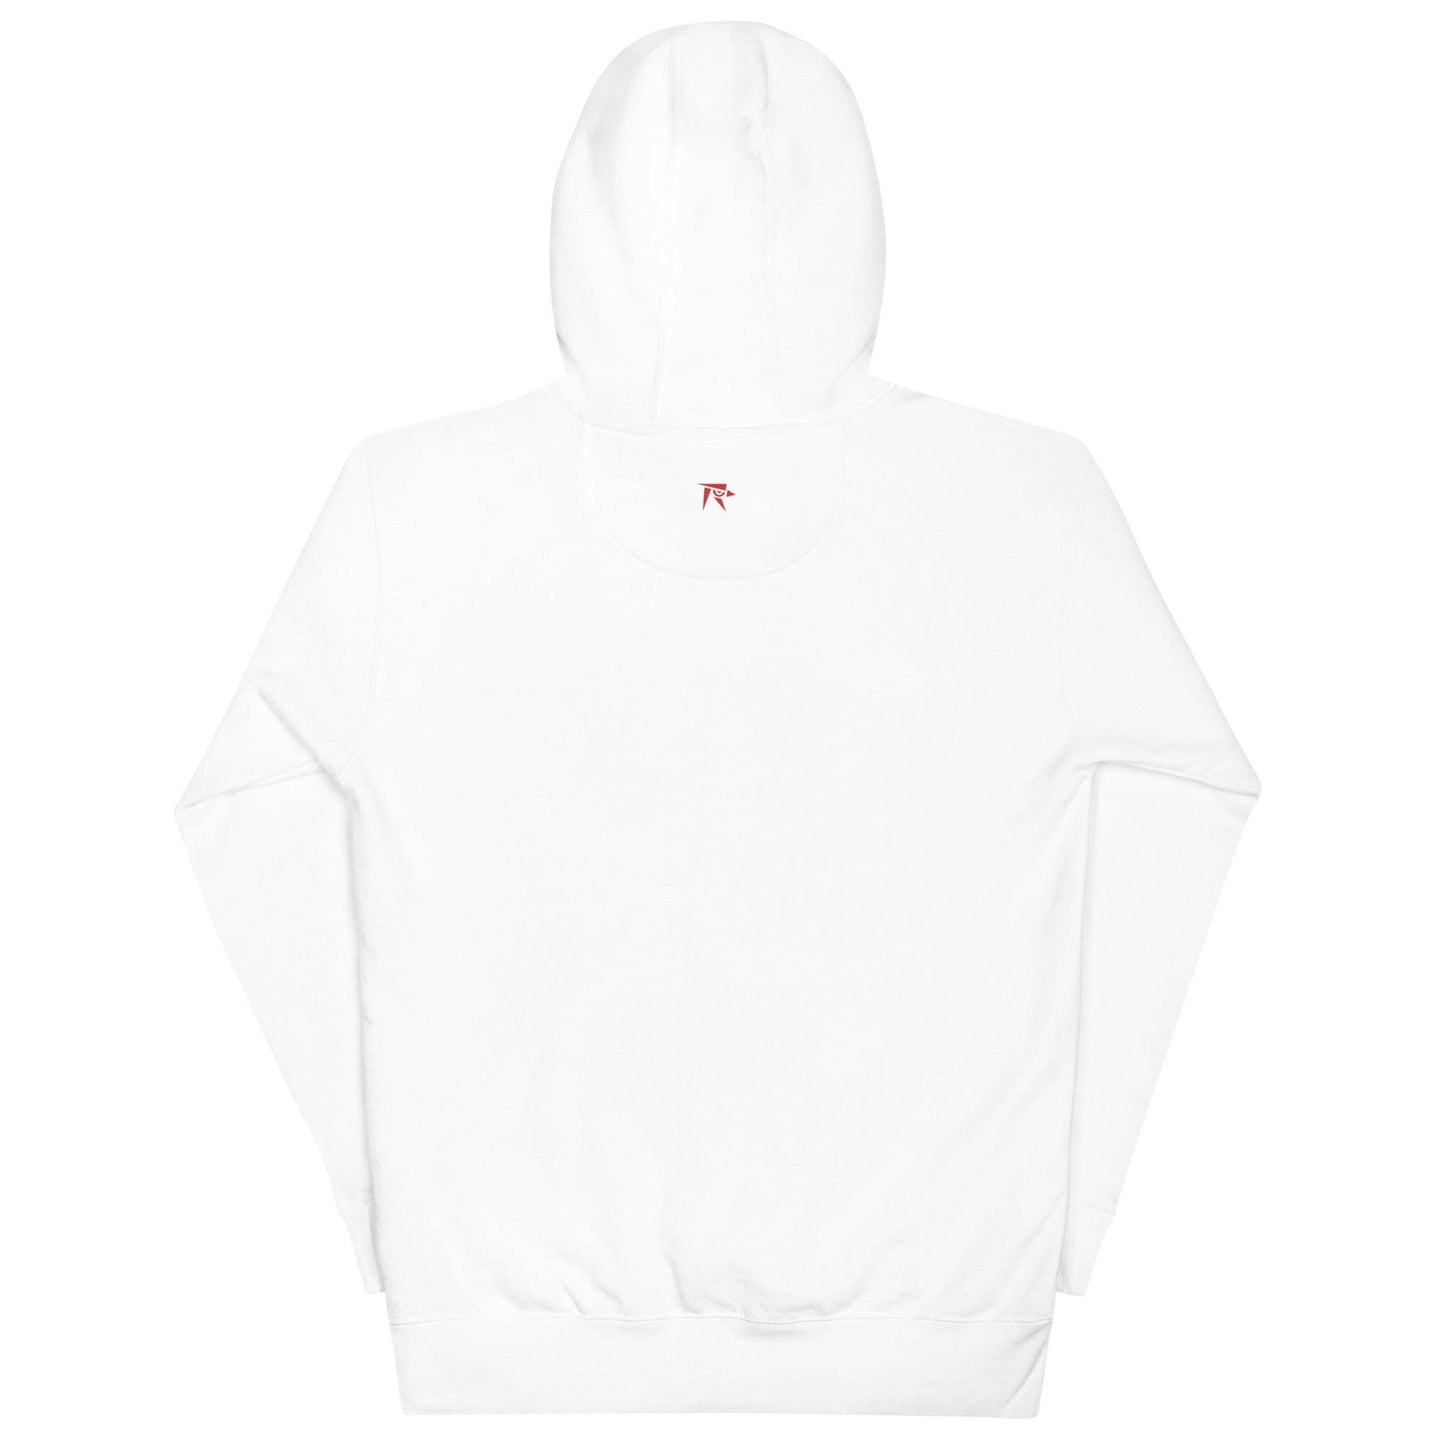 a white sweatshirt with a red logo on the chest